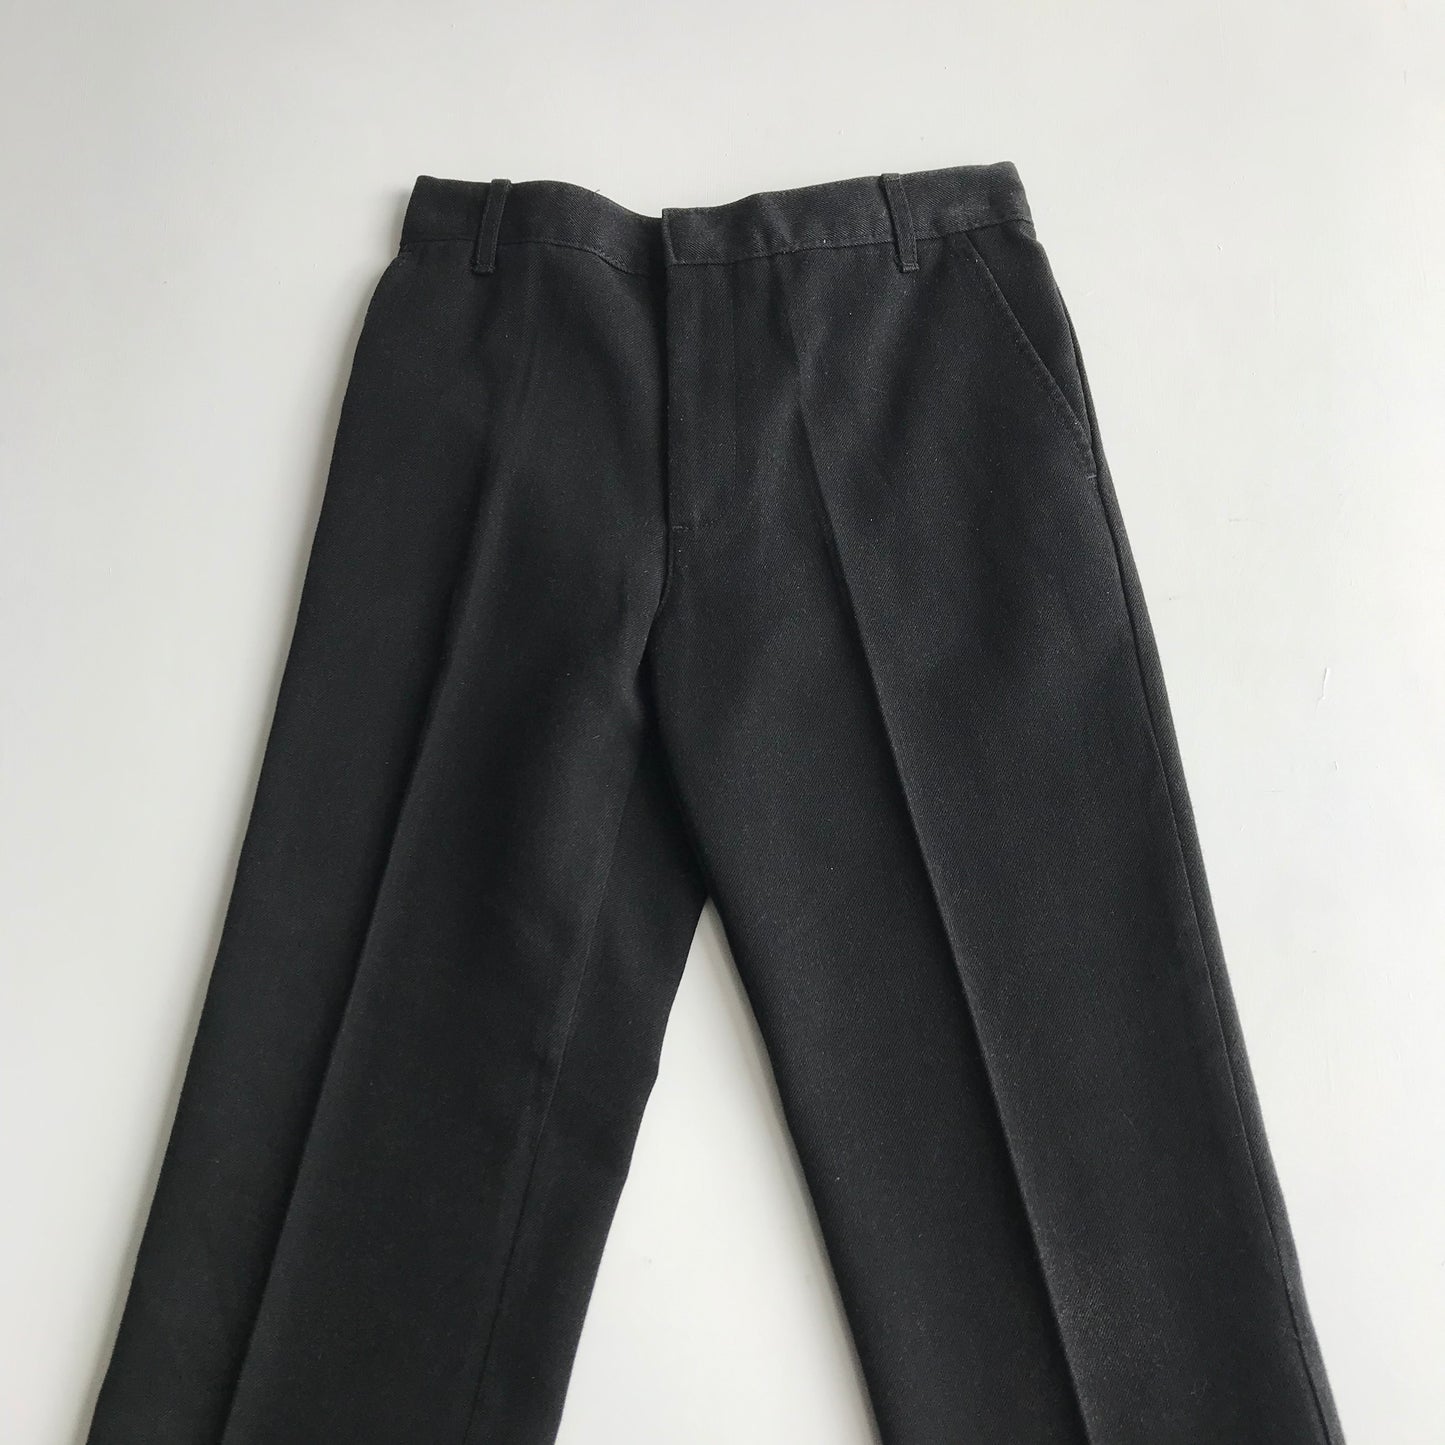 Charcoal Grey School Trousers with Elasticated Waist